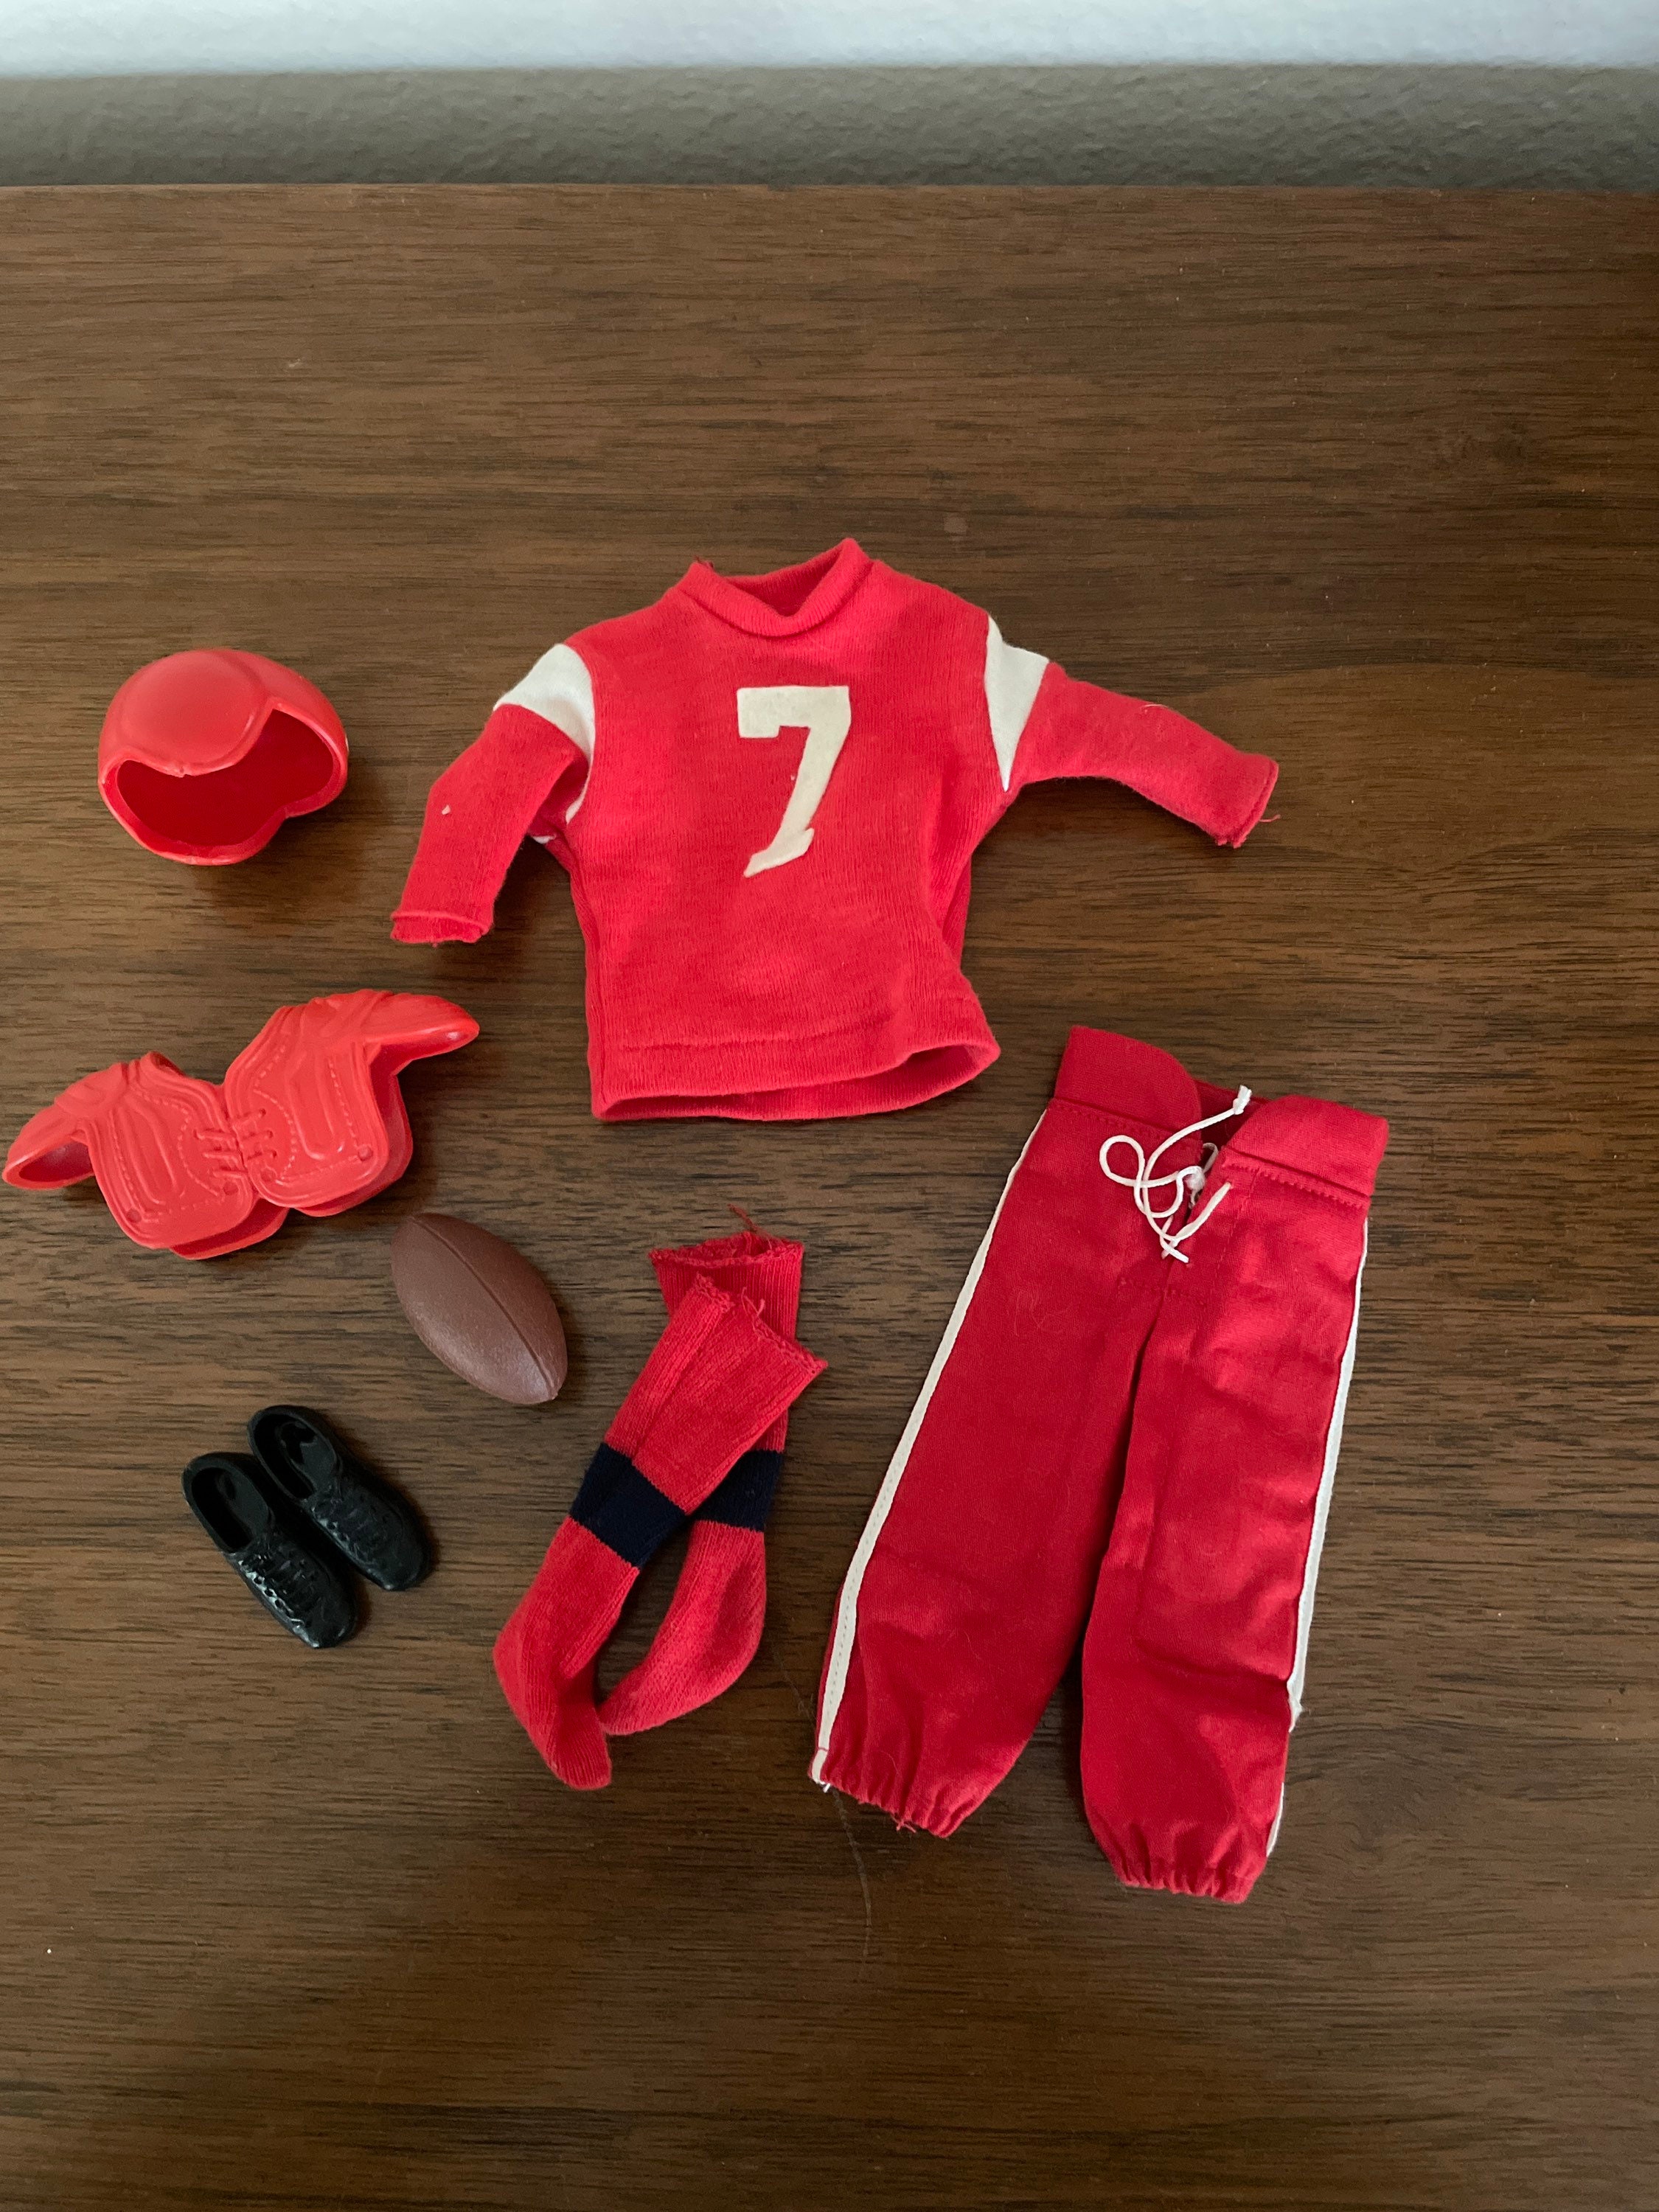 Vintage Ken Doll Outfit, 1960's Ken Clothes, Football Outfit